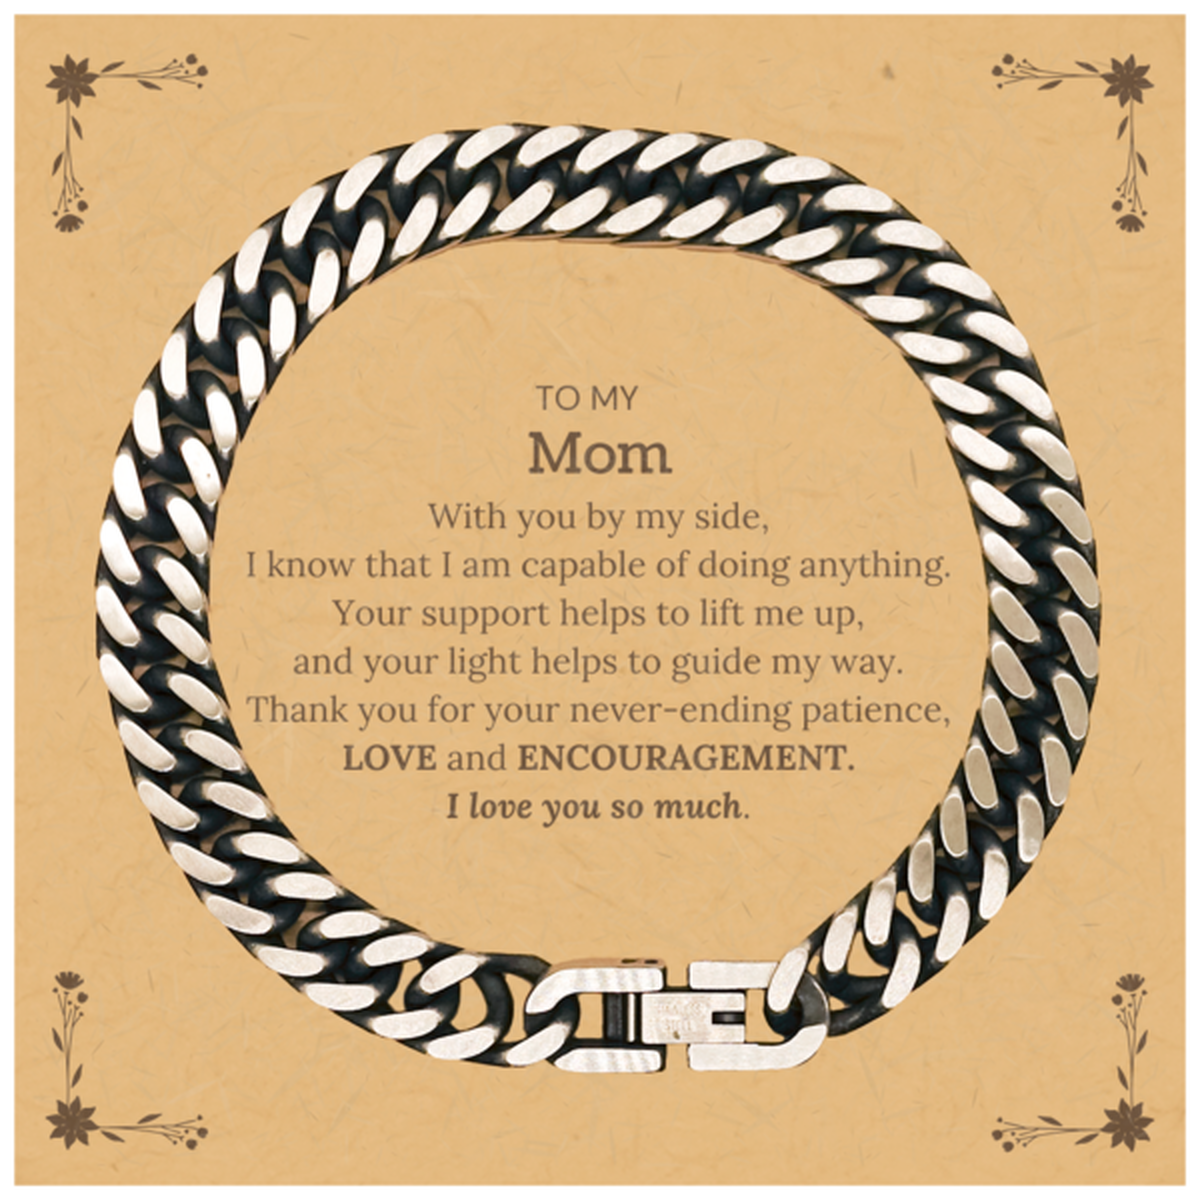 Appreciation Mom Cuban Link Chain Bracelet Gifts, To My Mom Birthday Christmas Wedding Keepsake Gifts for Mom With you by my side, I know that I am capable of doing anything. I love you so much